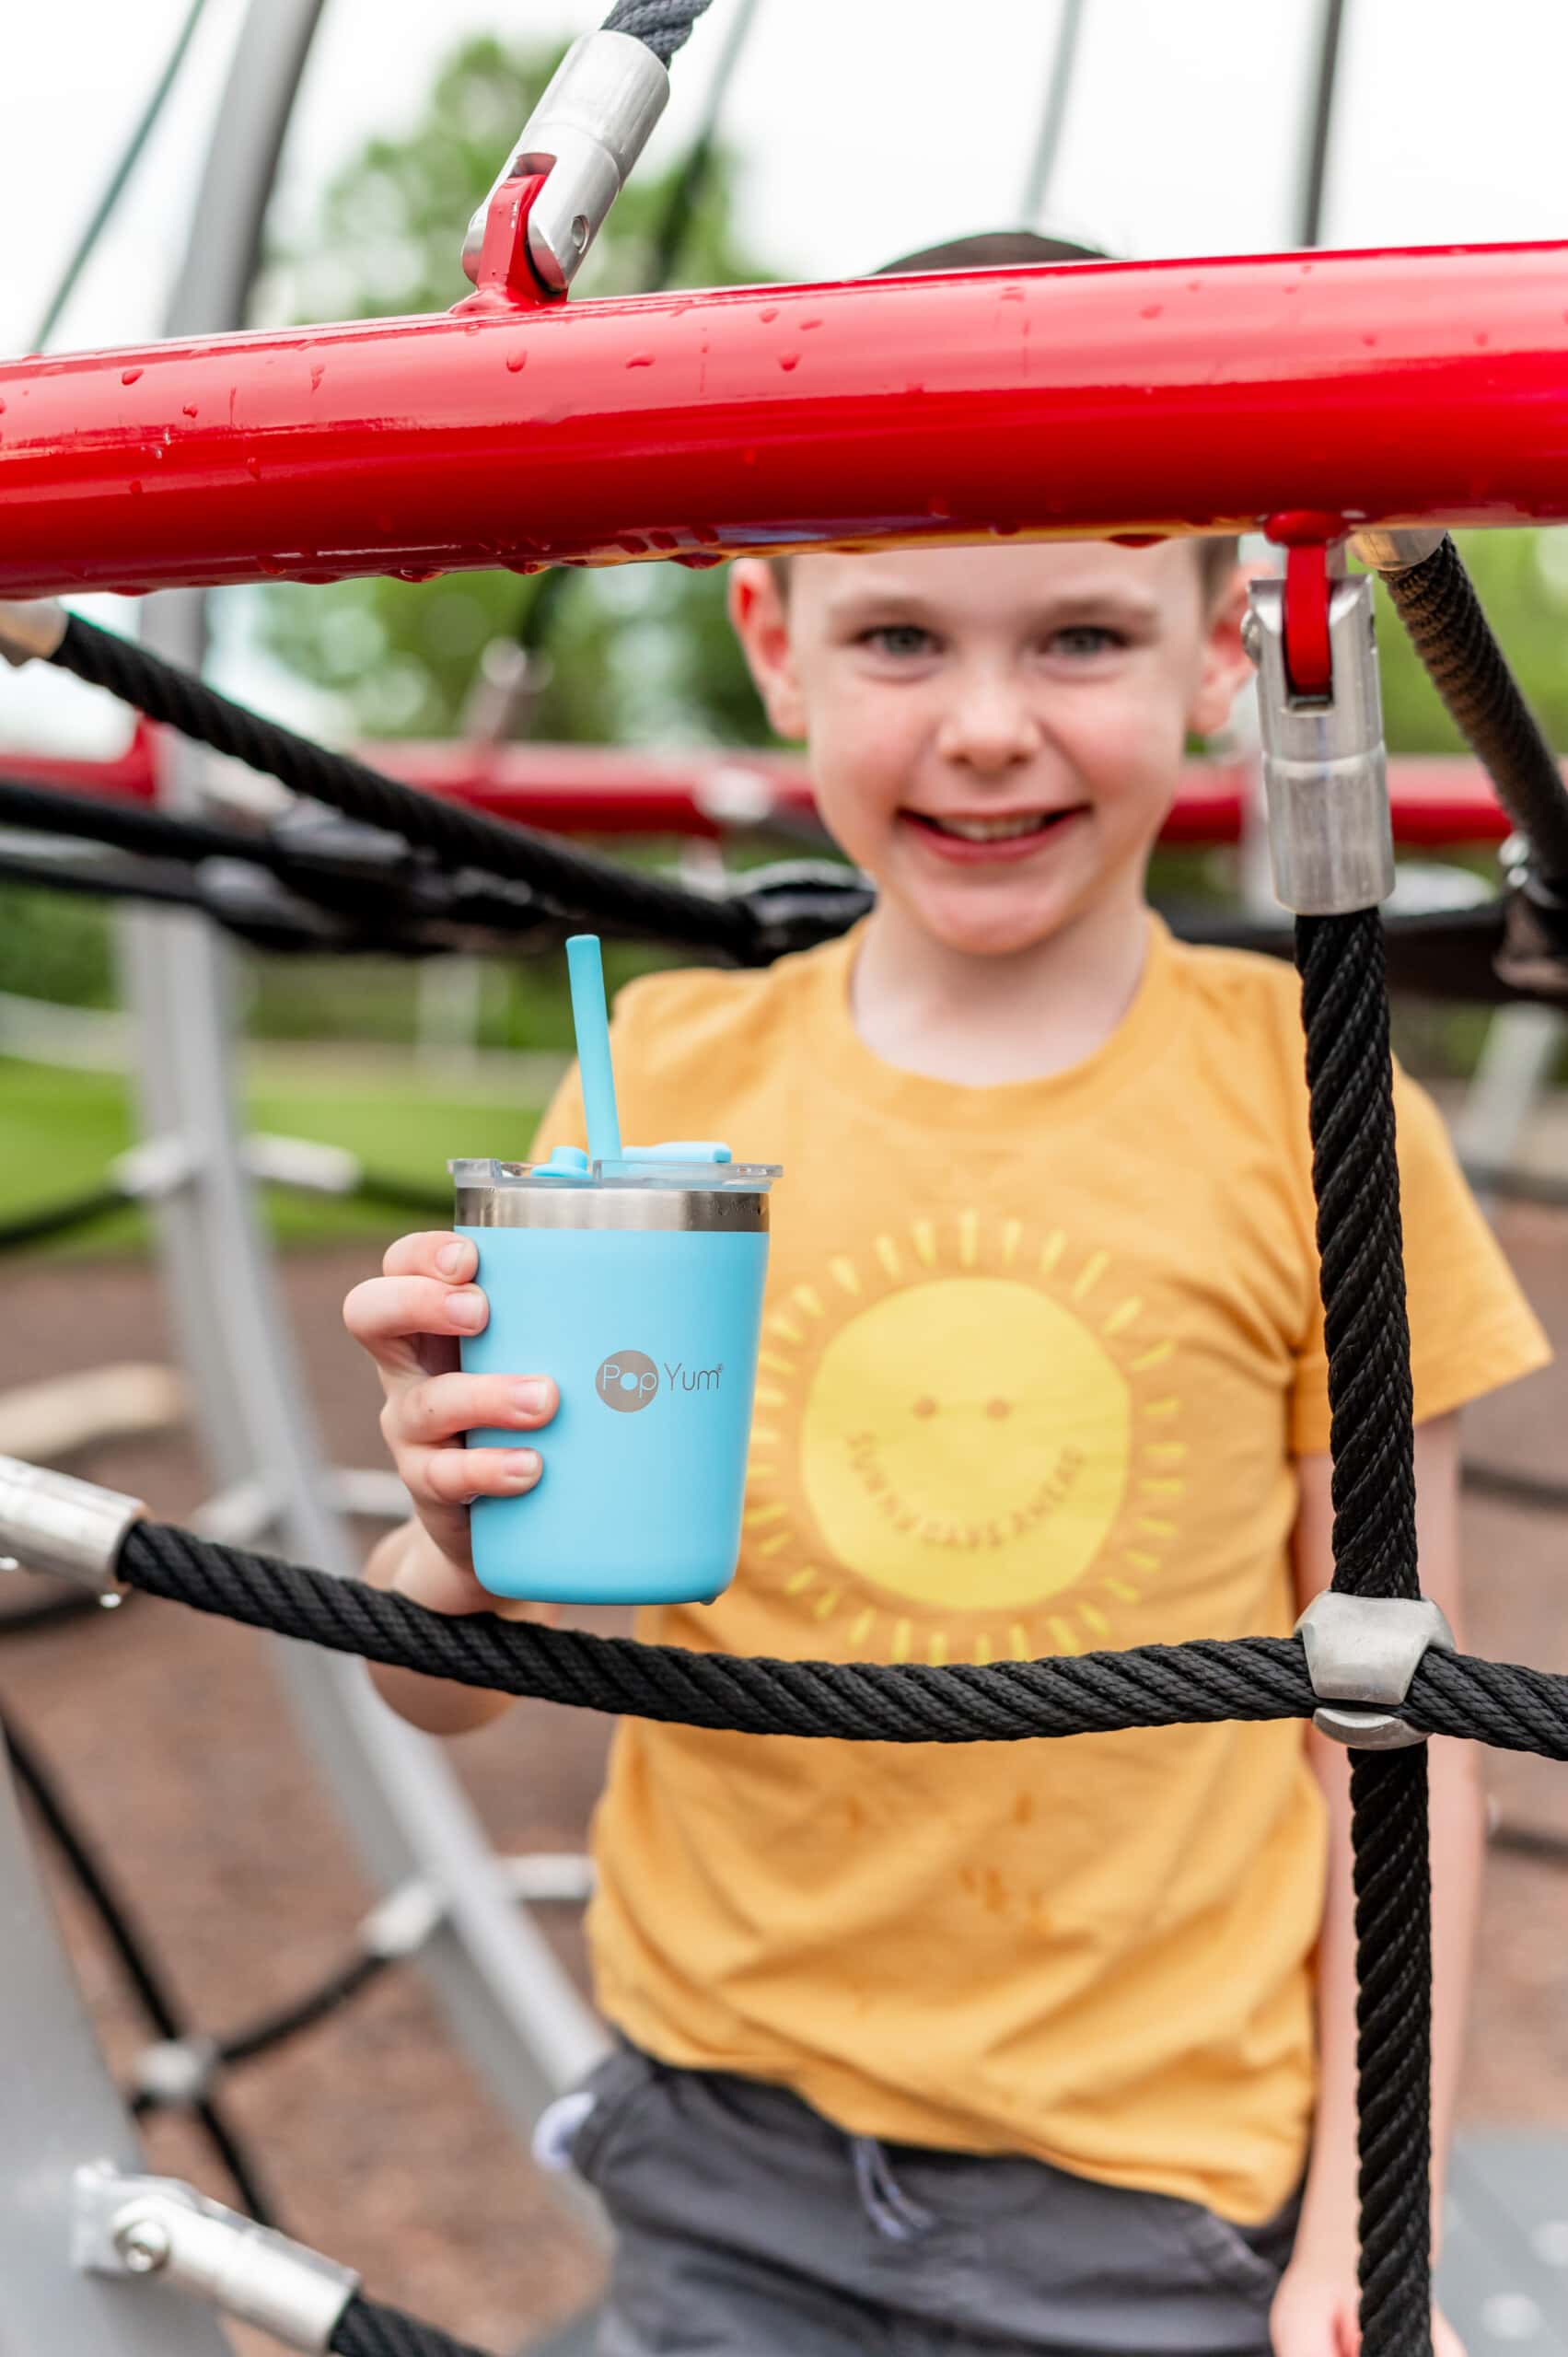 Young boy on the playground holding the blue PopYum Kids Cup